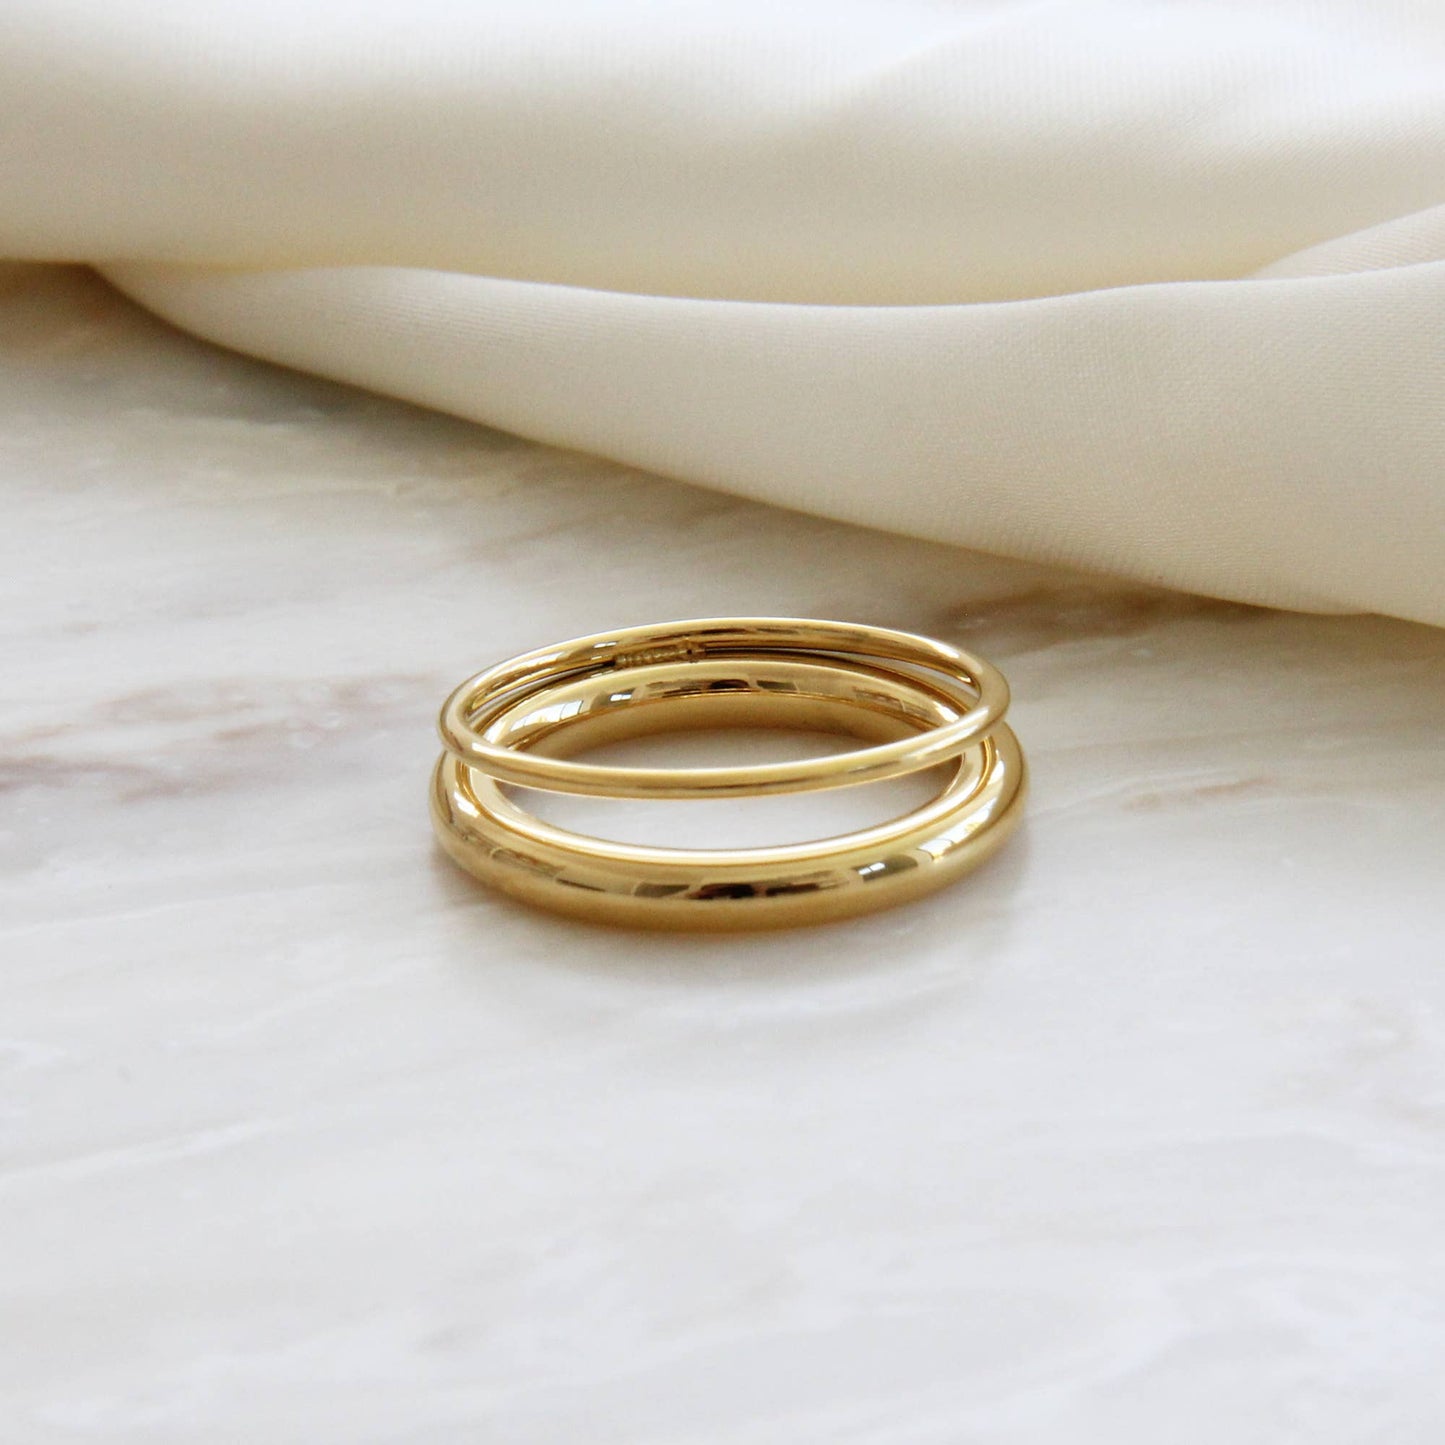 Maive Double Band Ring